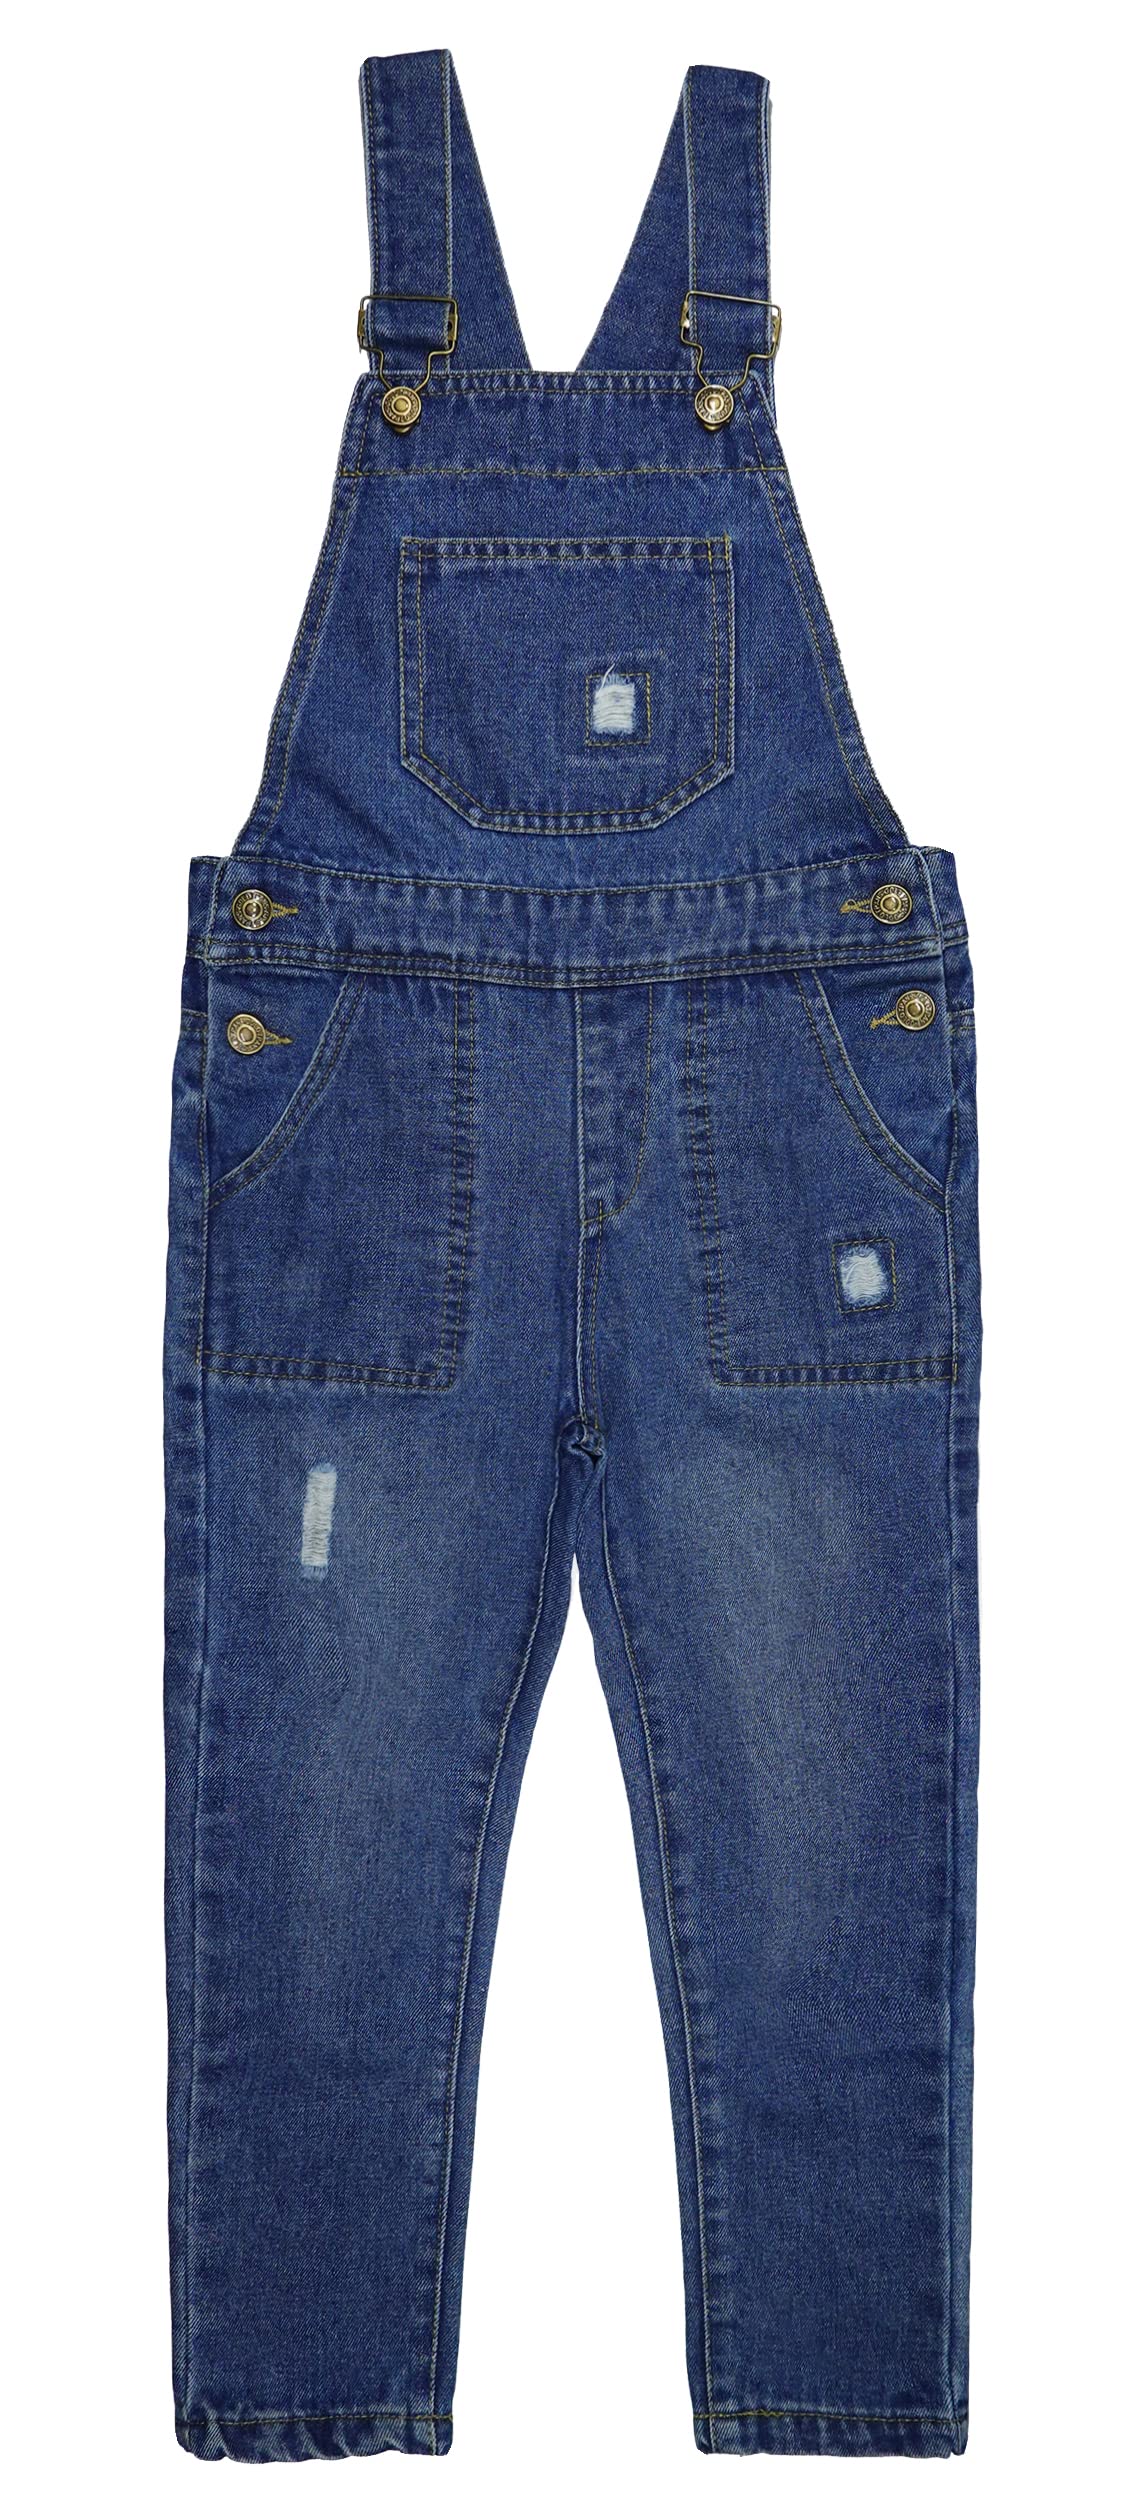 KIDSCOOL SPACE Boys Denim Overalls,Ripped Holes Elastic Band Inside Jeans Workwear